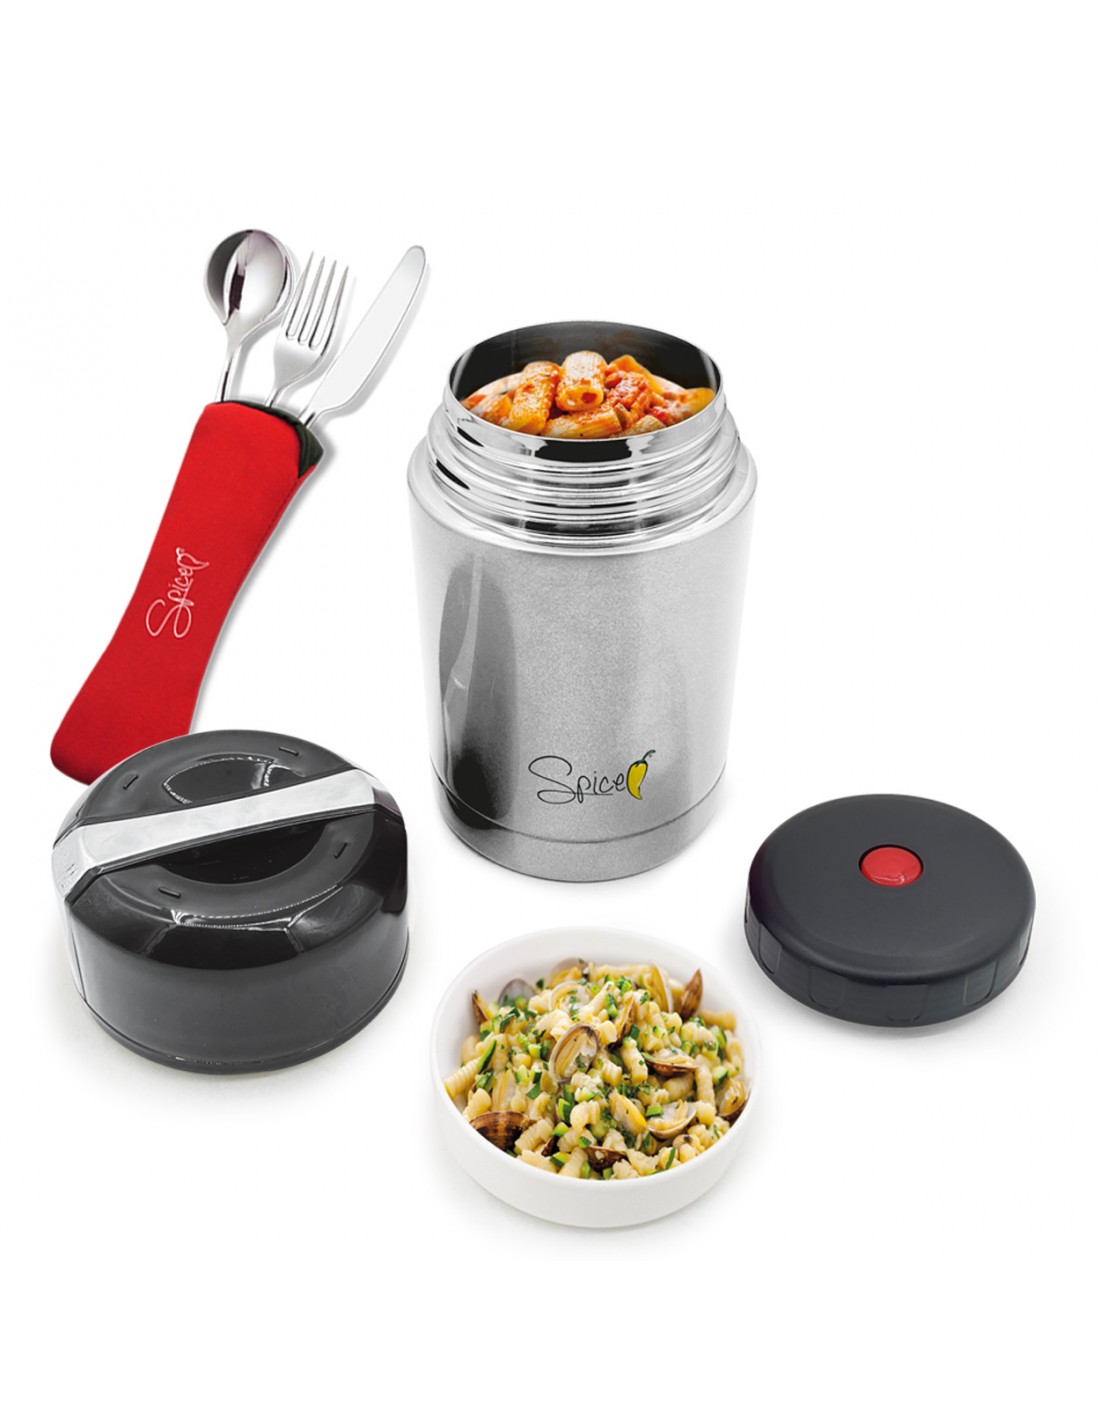 https://www.spice-electronics.com/3188-thickbox_default/thermos-set-thermal-food-container-1l-3-stainless-steel-cutlery.jpg